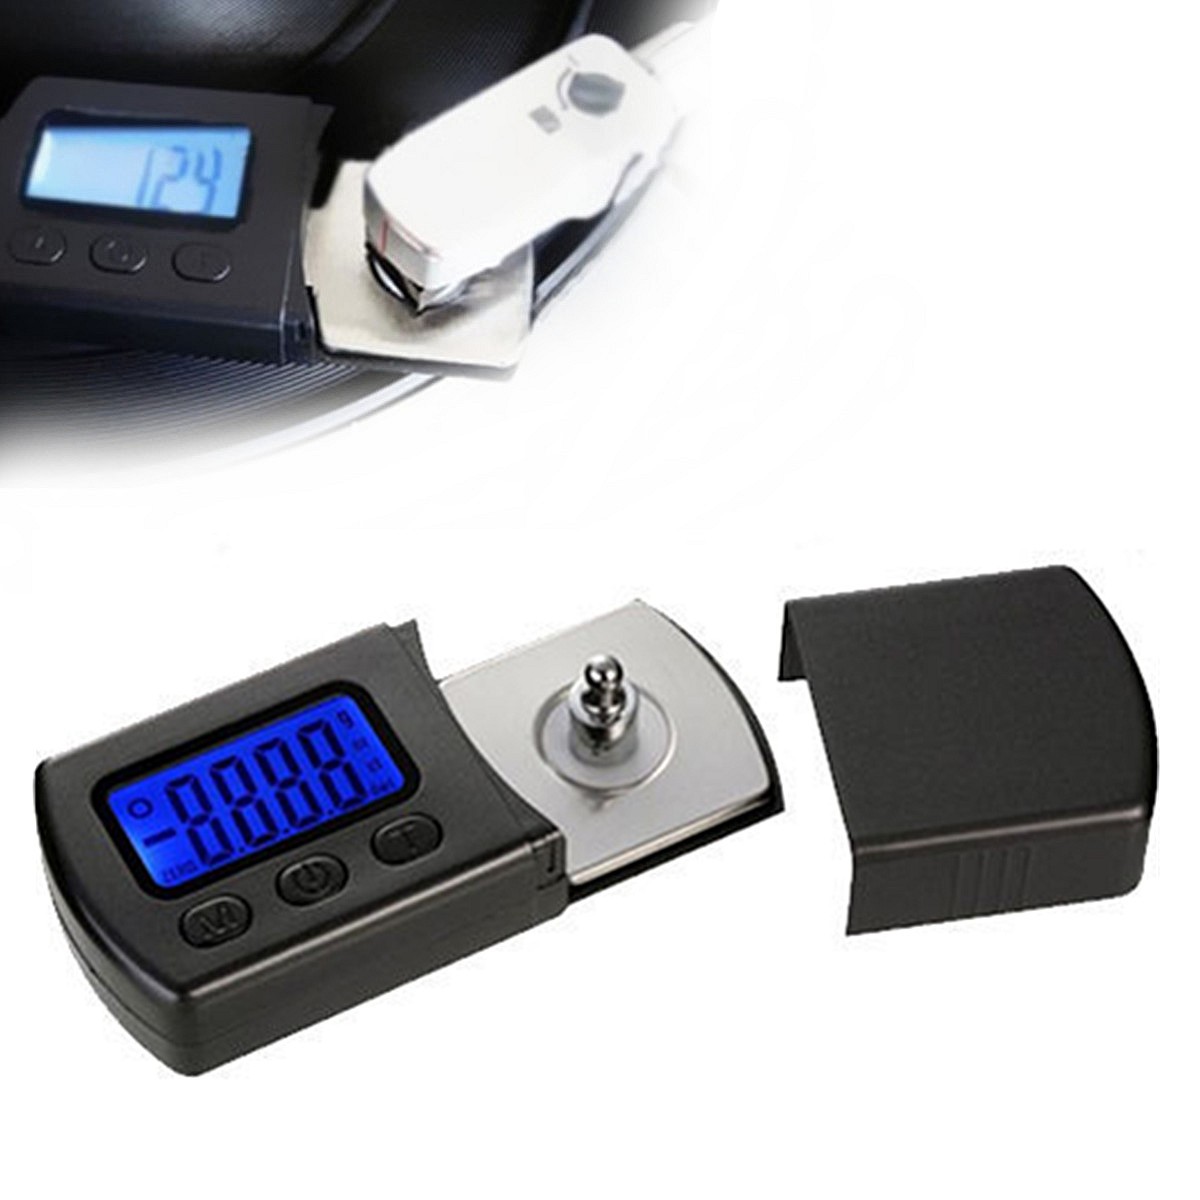 001gx5g-Professional-Digital-Turntable-Stylus-Force-Scale-Gauge-for-Jewelry-1045348